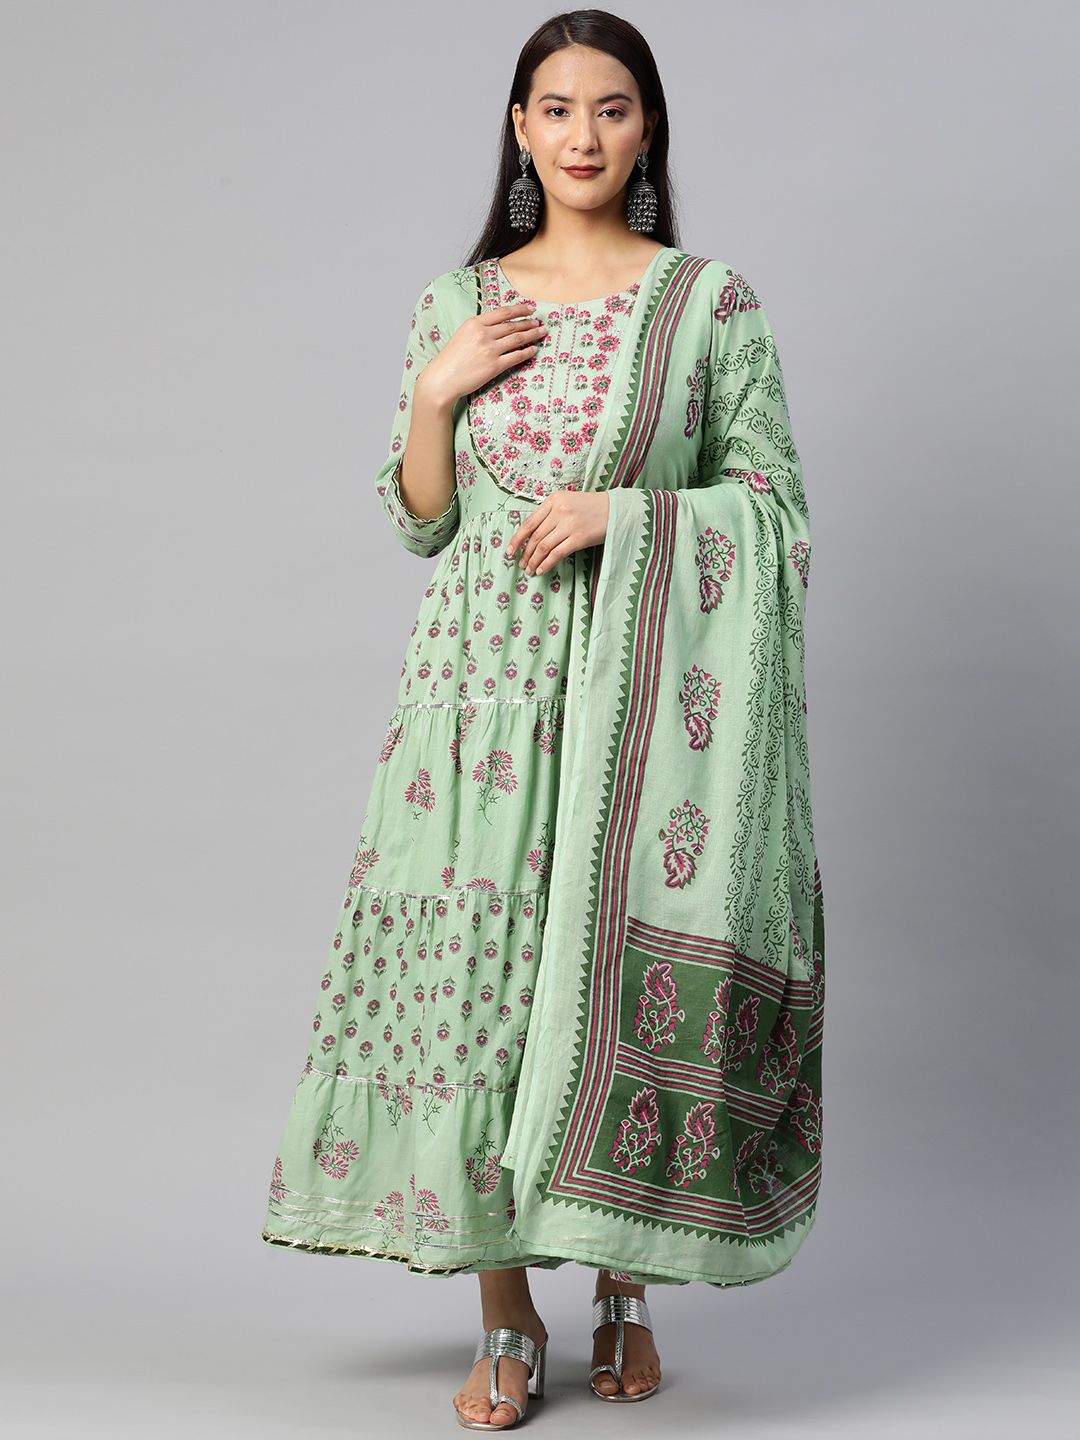 Readiprint Fashions Floral Embroidered Cotton Ethnic Maxi Dress Price in India